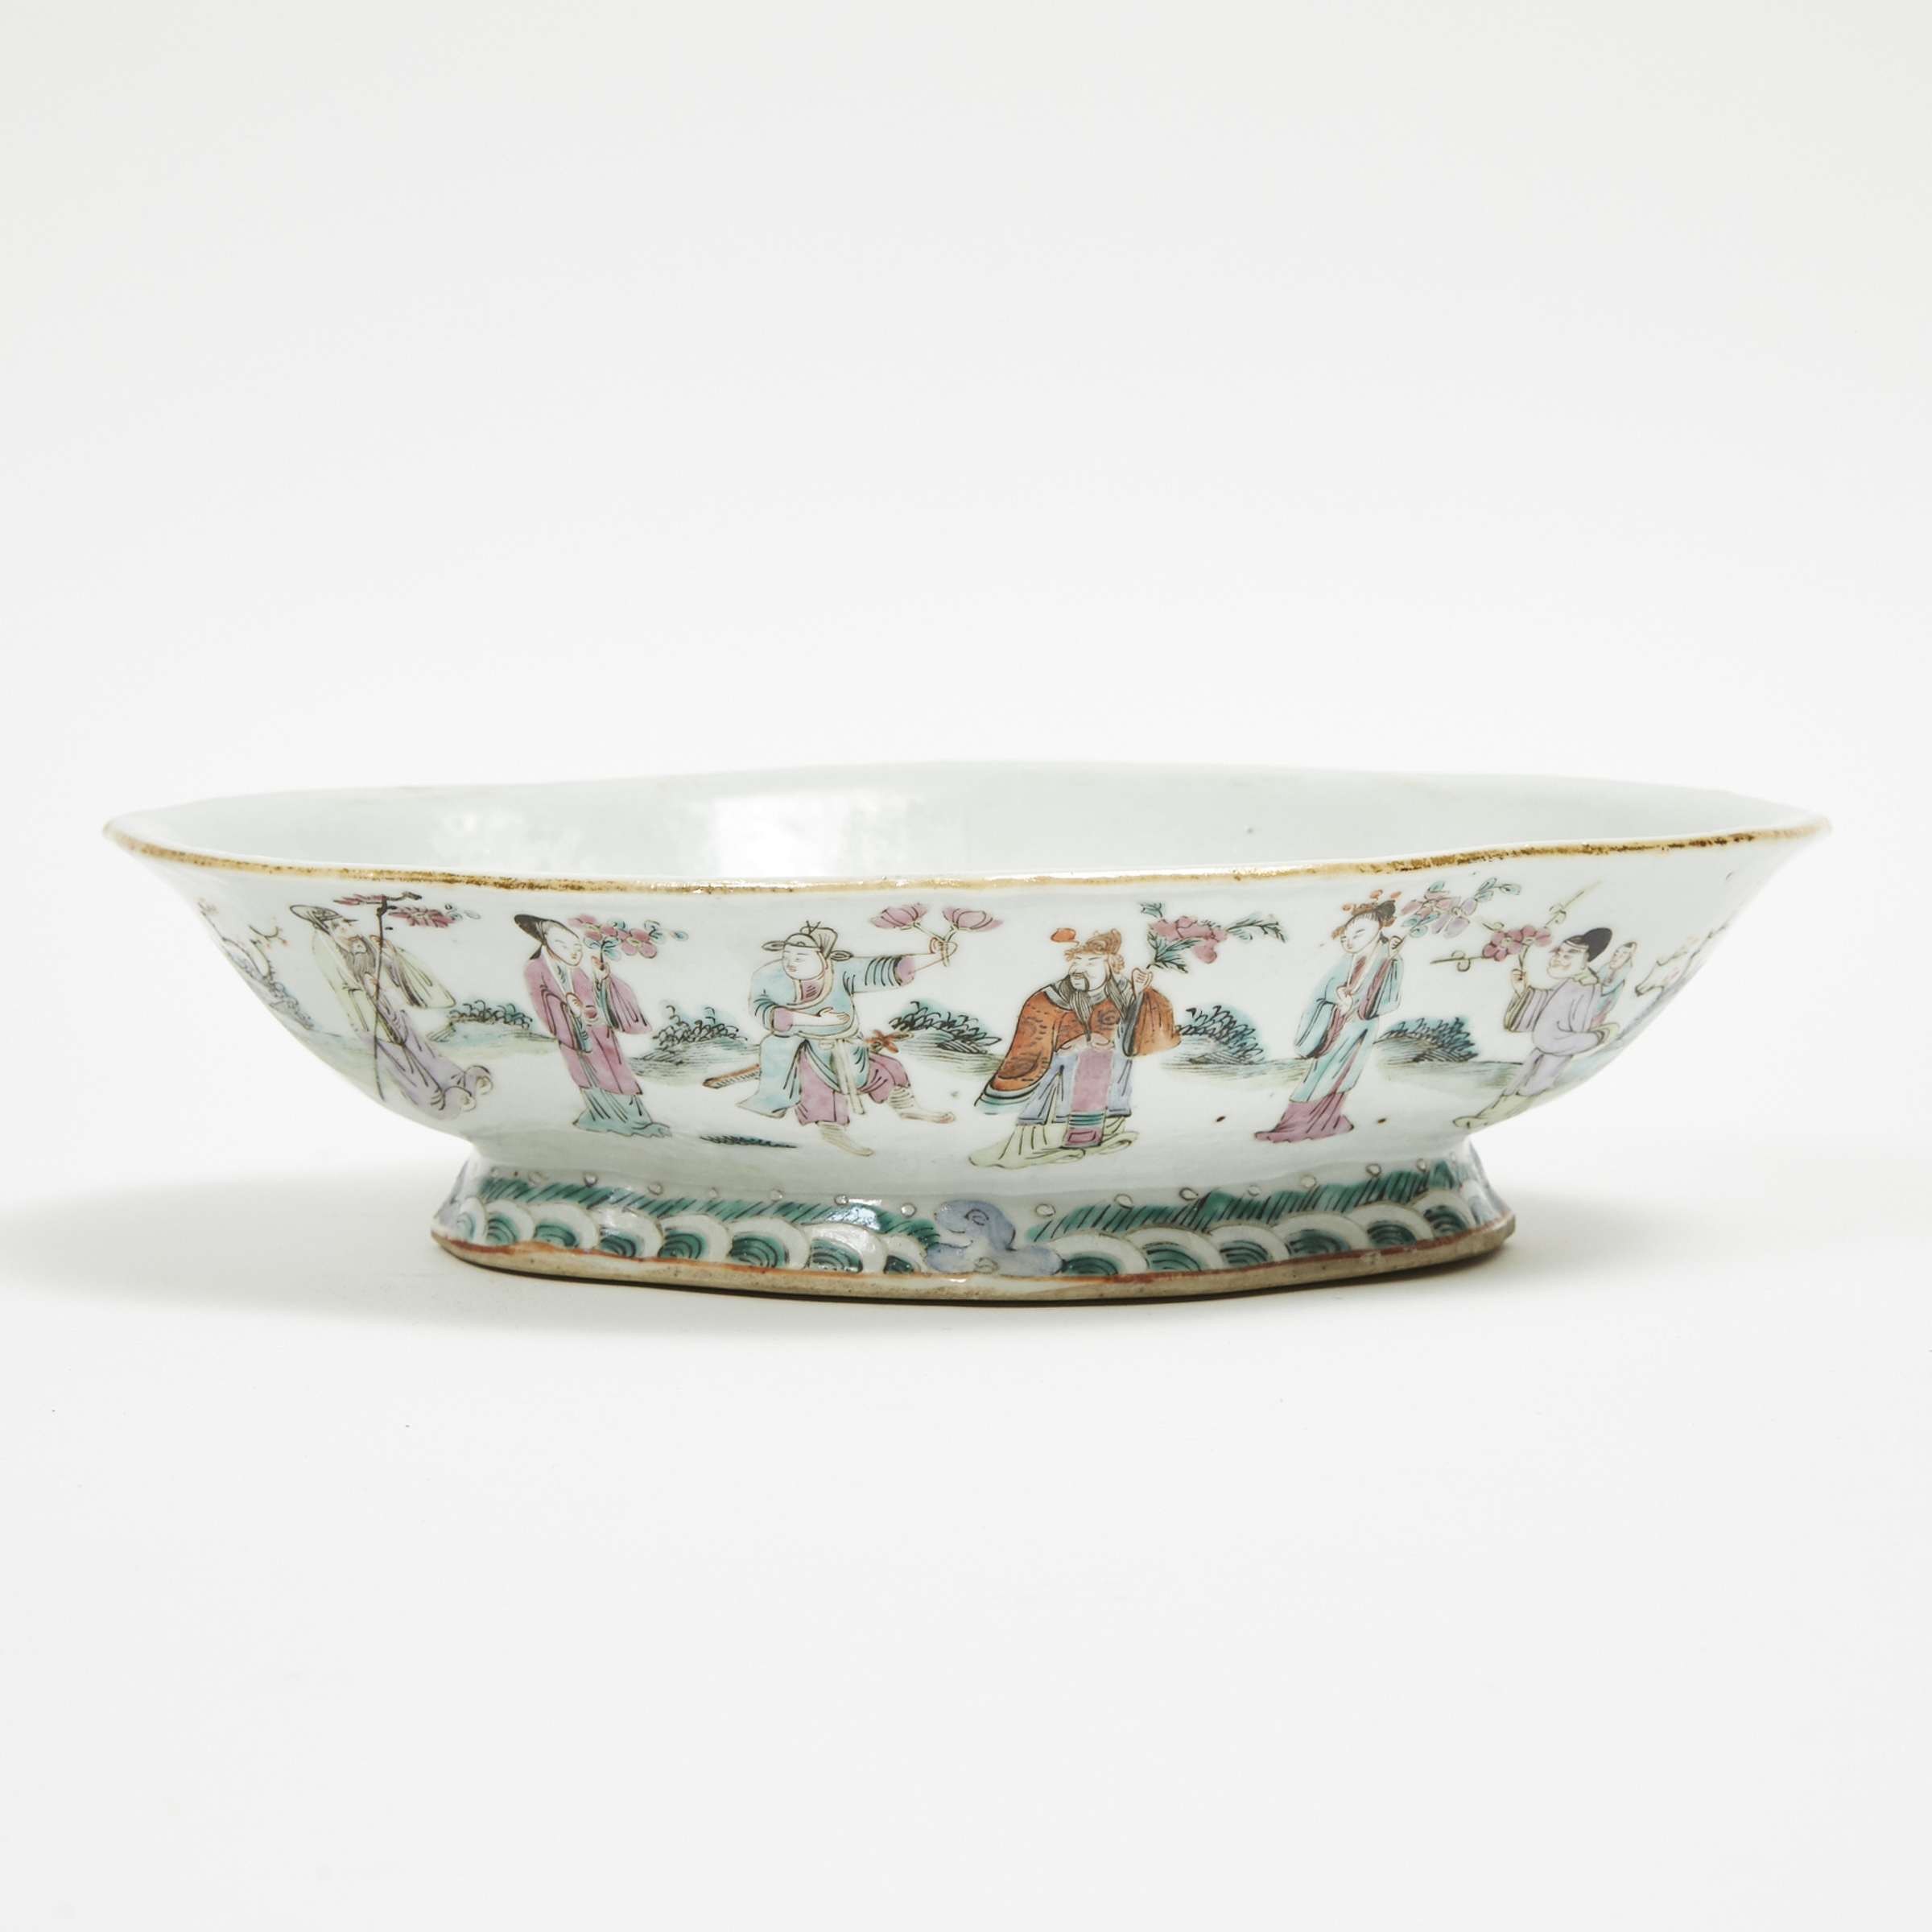 A Famille Rose 'Eight Immortals' Footed Dish, 19th Century